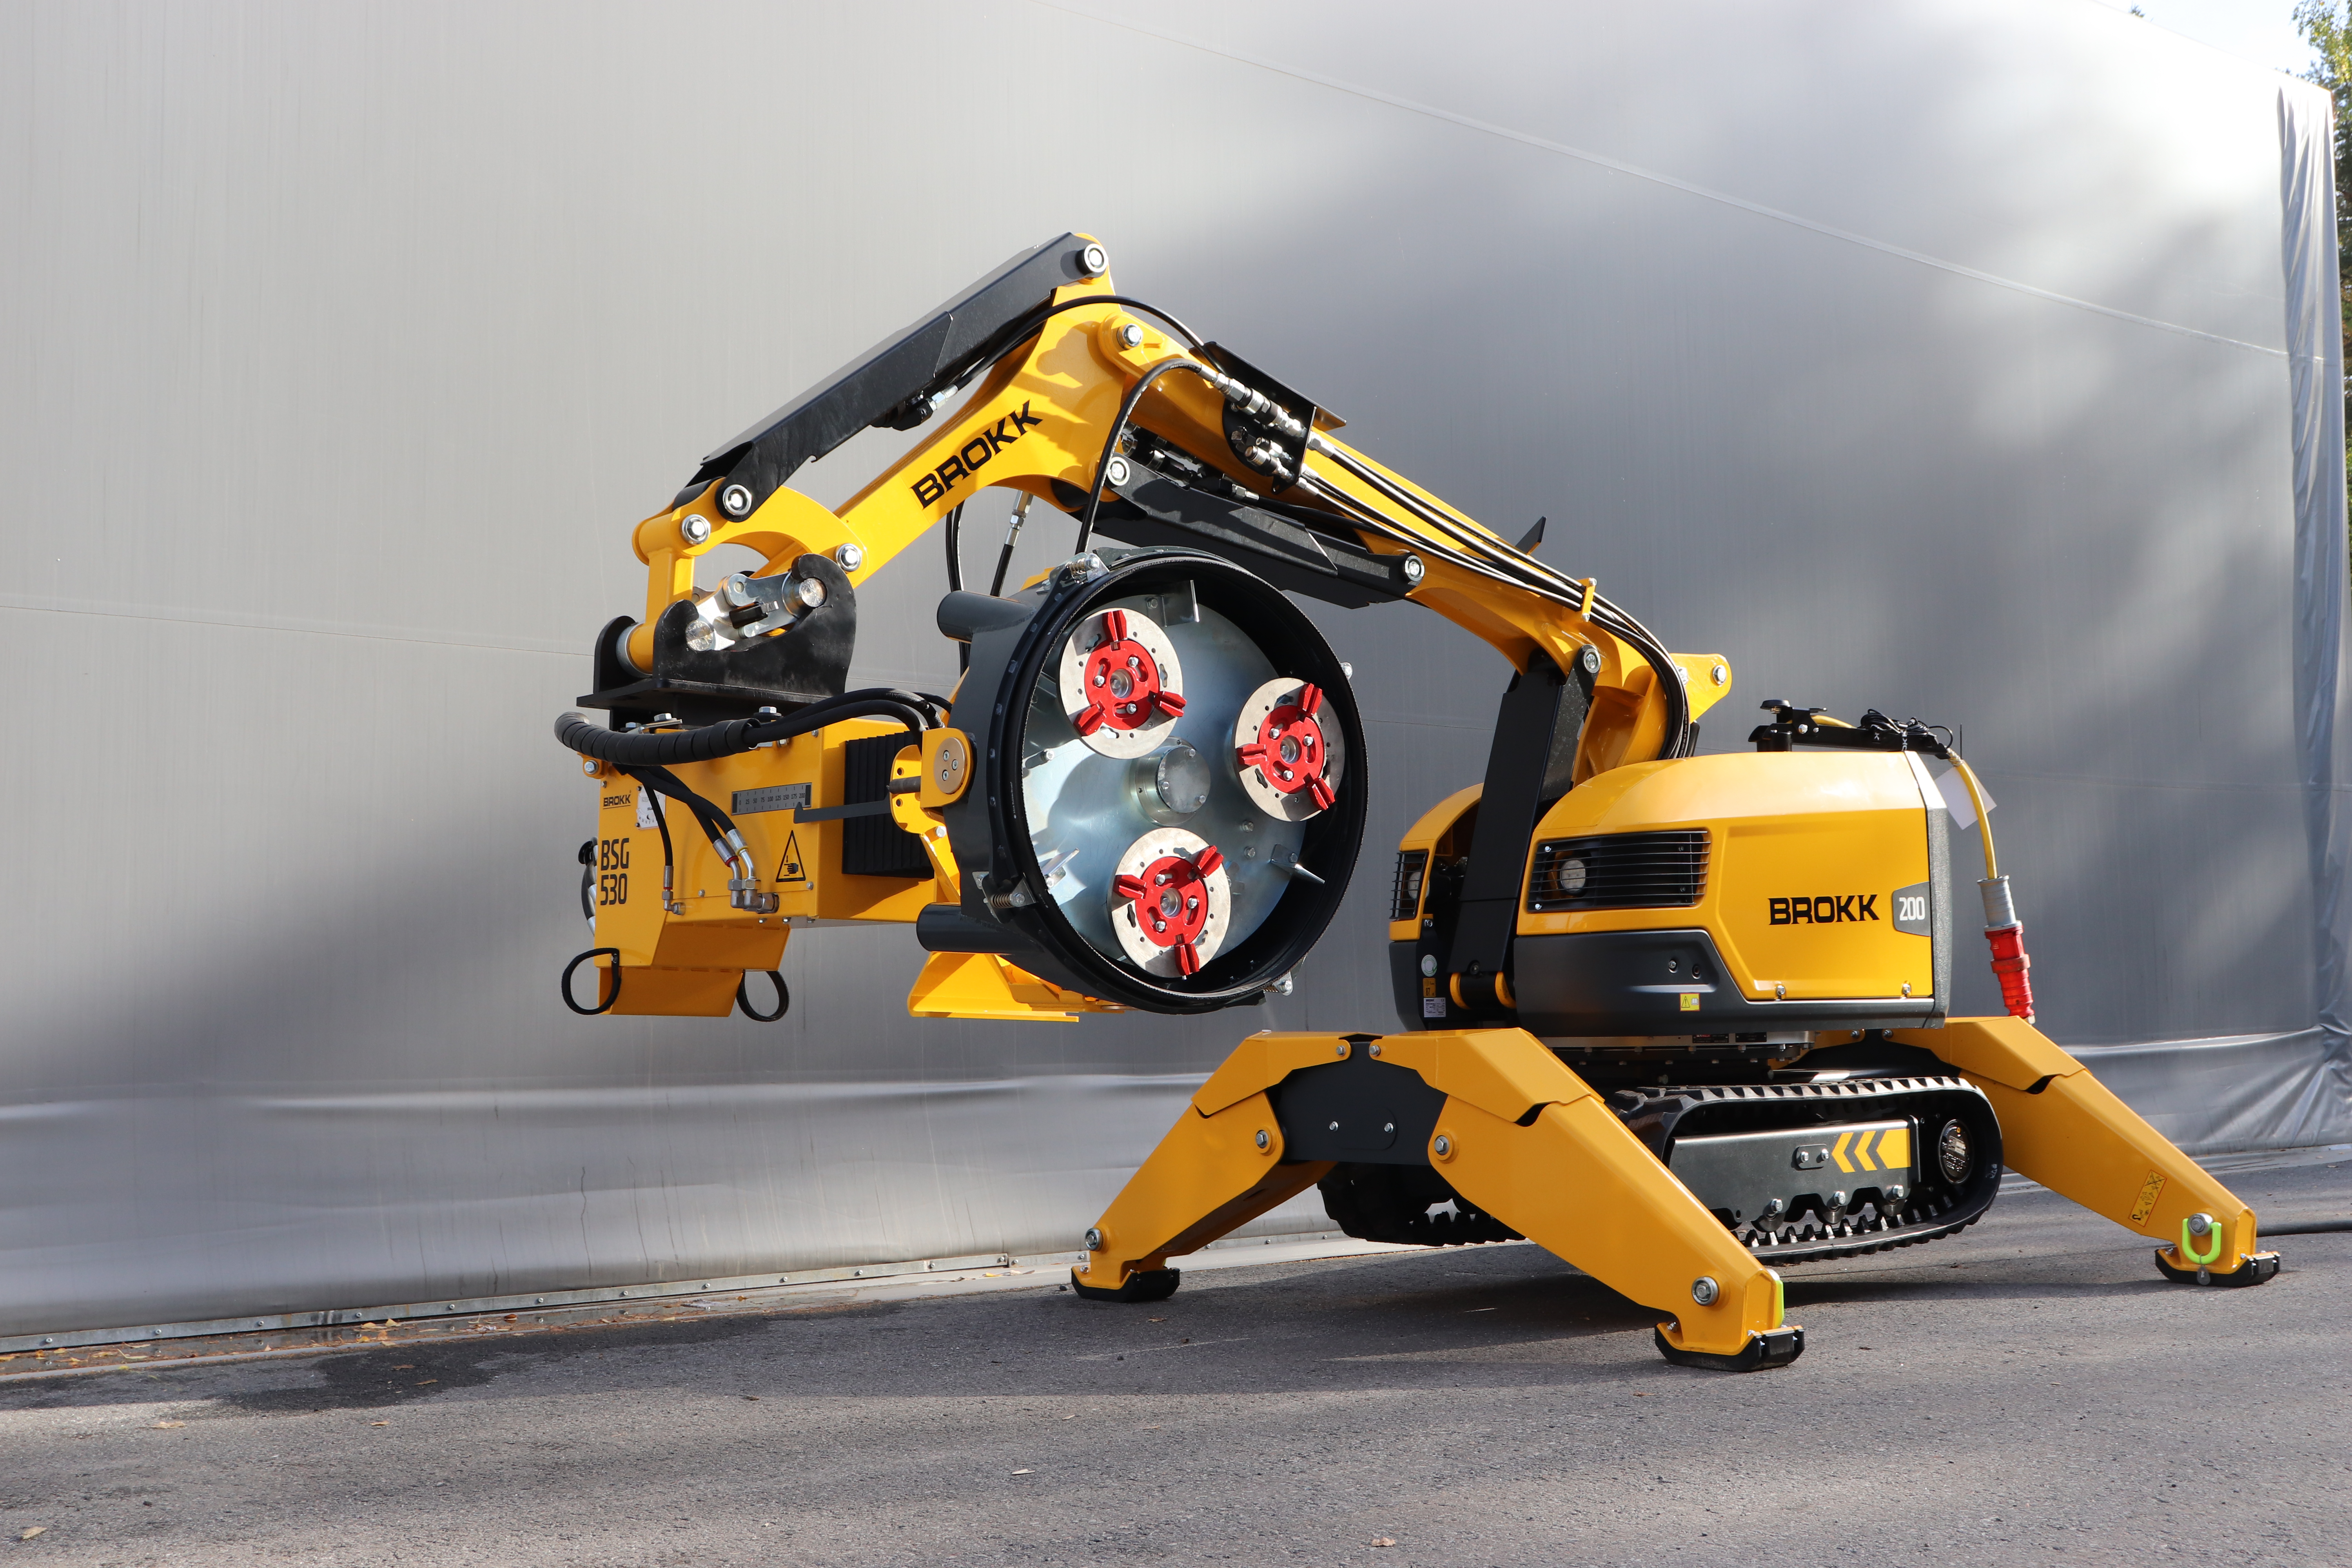 The new Brokk Surface Grinder 530, paired with a Brokk 170, Brokk 200 or Brokk 300 removes material, such as paint and asbestos, up to 10 times faster than handheld methods.